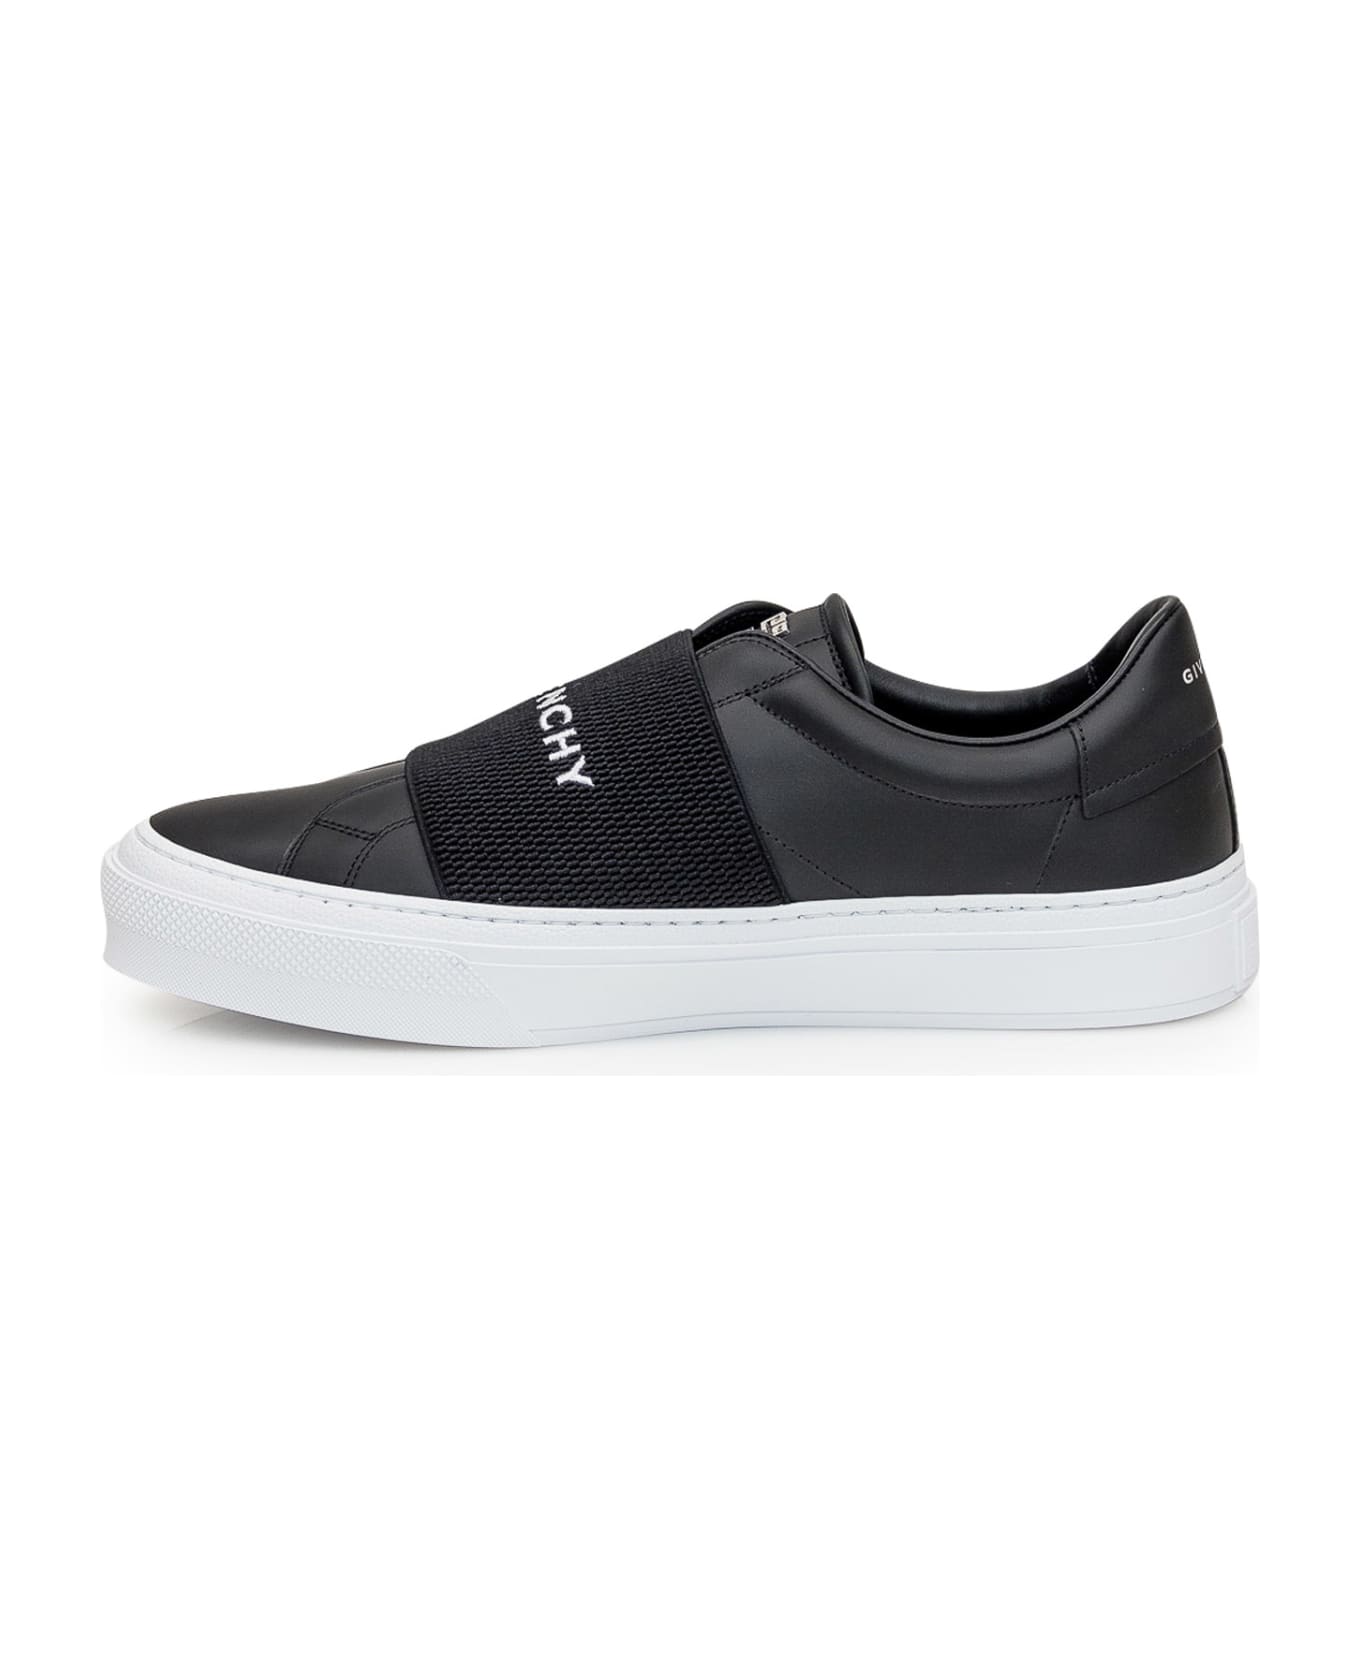 Givenchy City Sport Sneakers - Black スニーカー